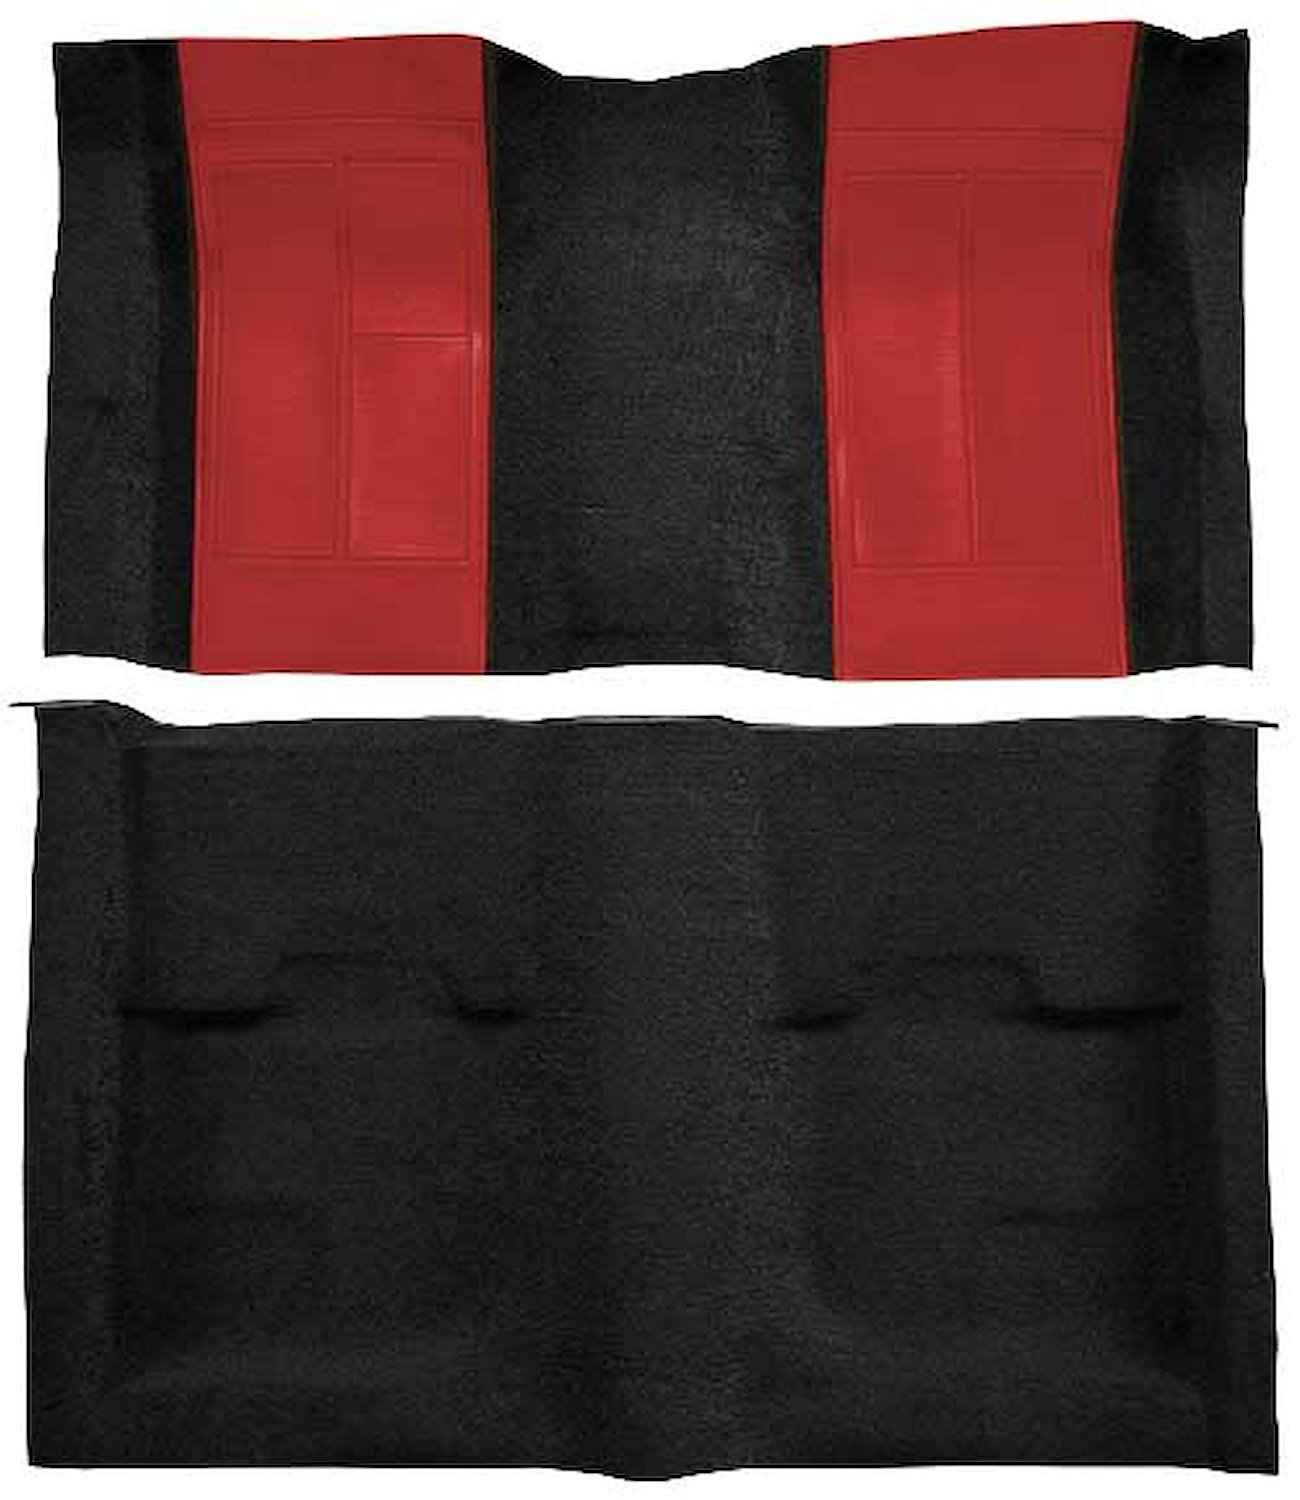 A4109B02 Nylon Loop Floor Carpet With Mass Backing 1970 Mustang Mach 1; Black Carpet/Red Inserts